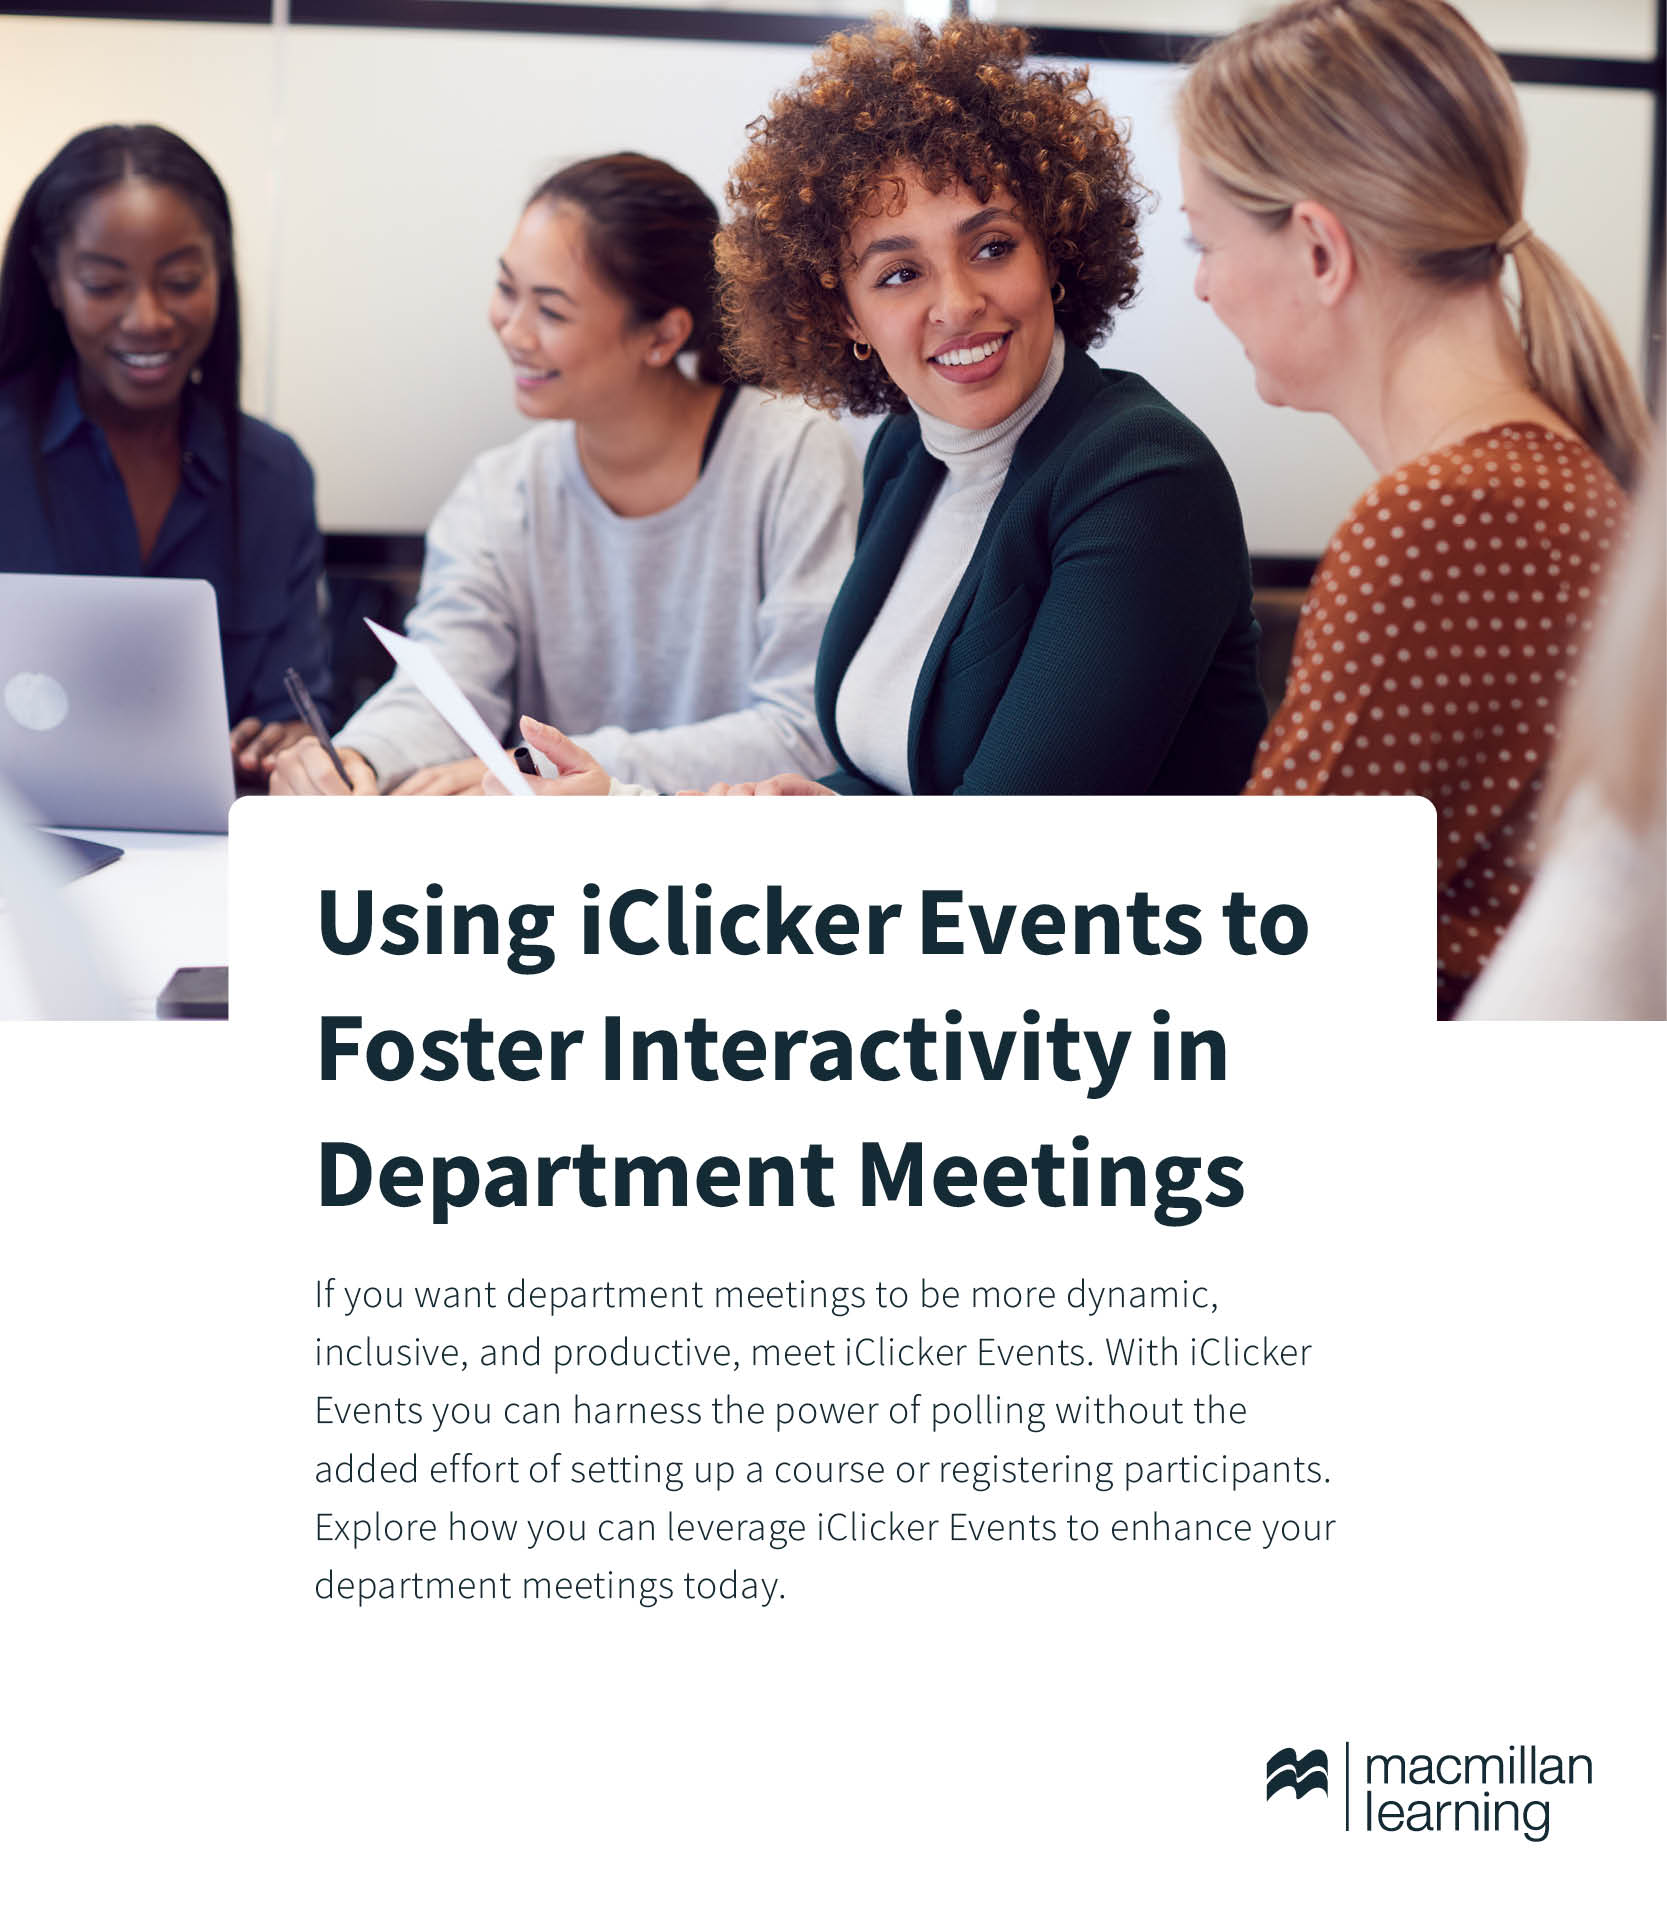 Using iClicker Events to Foster Interactivity in Department Meetings